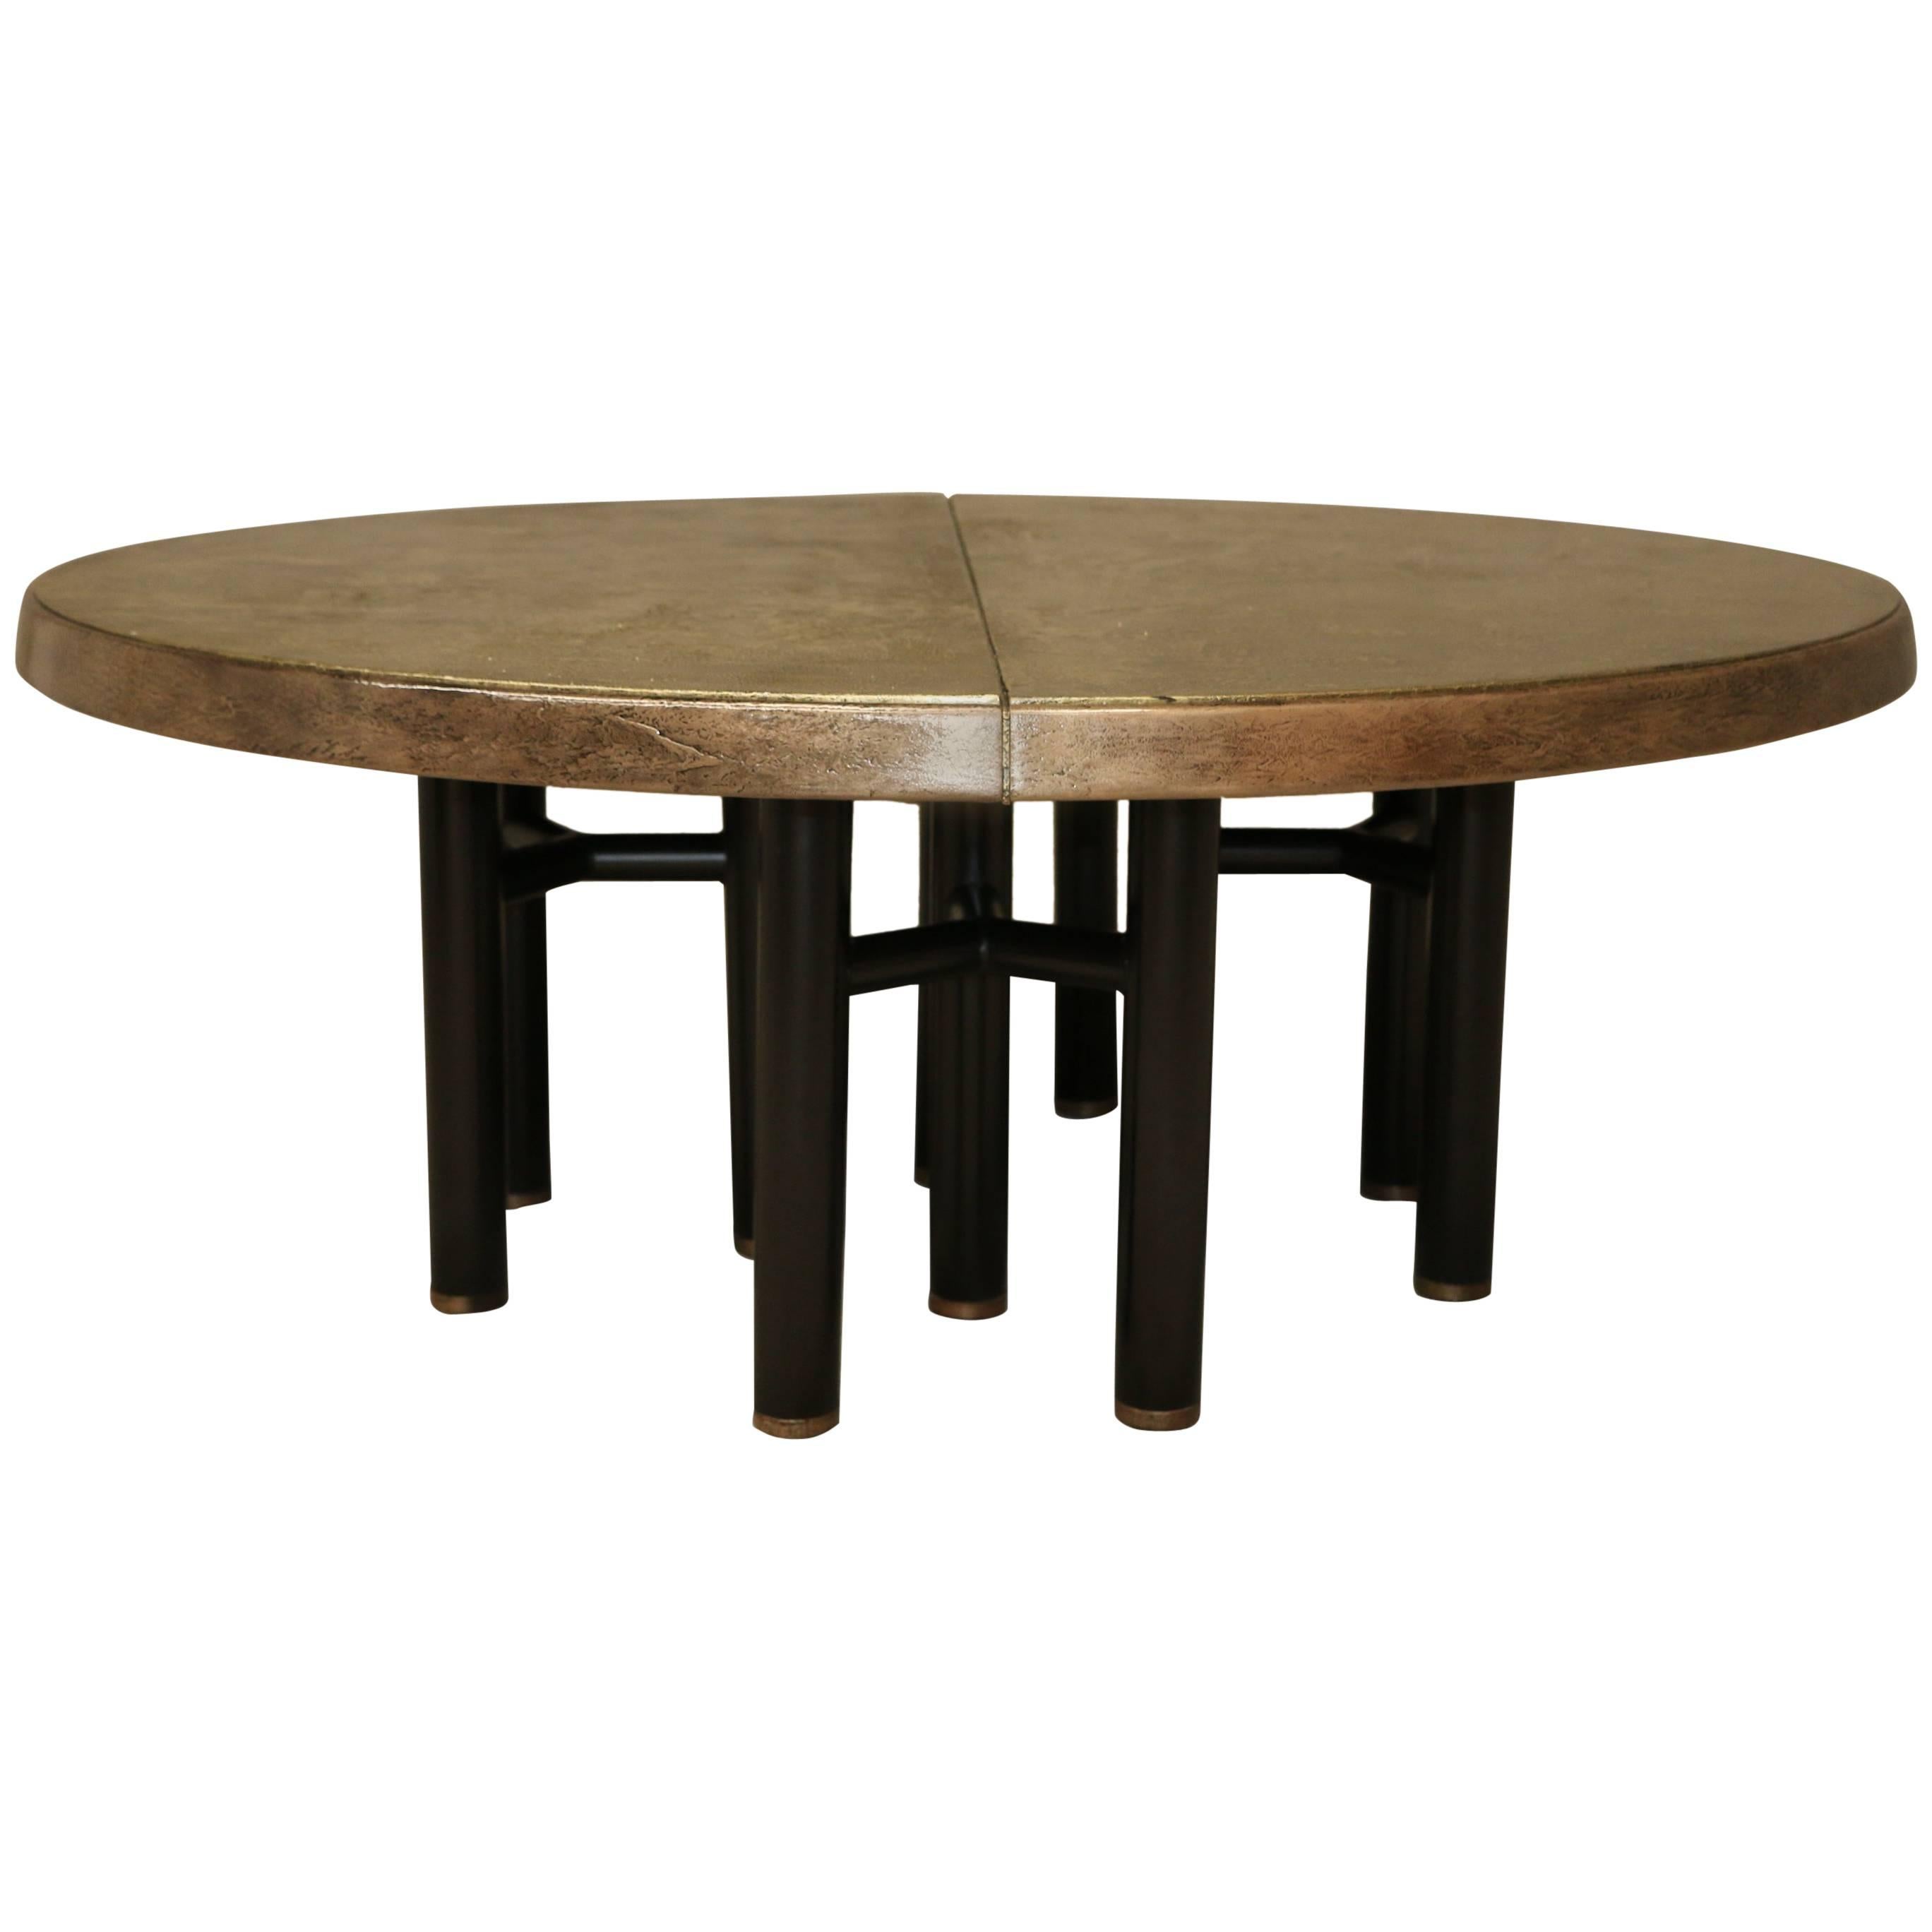 Pimped Vintage Brass and Bronze Large Dining Table MIM, Italy Ico Parisi For Sale